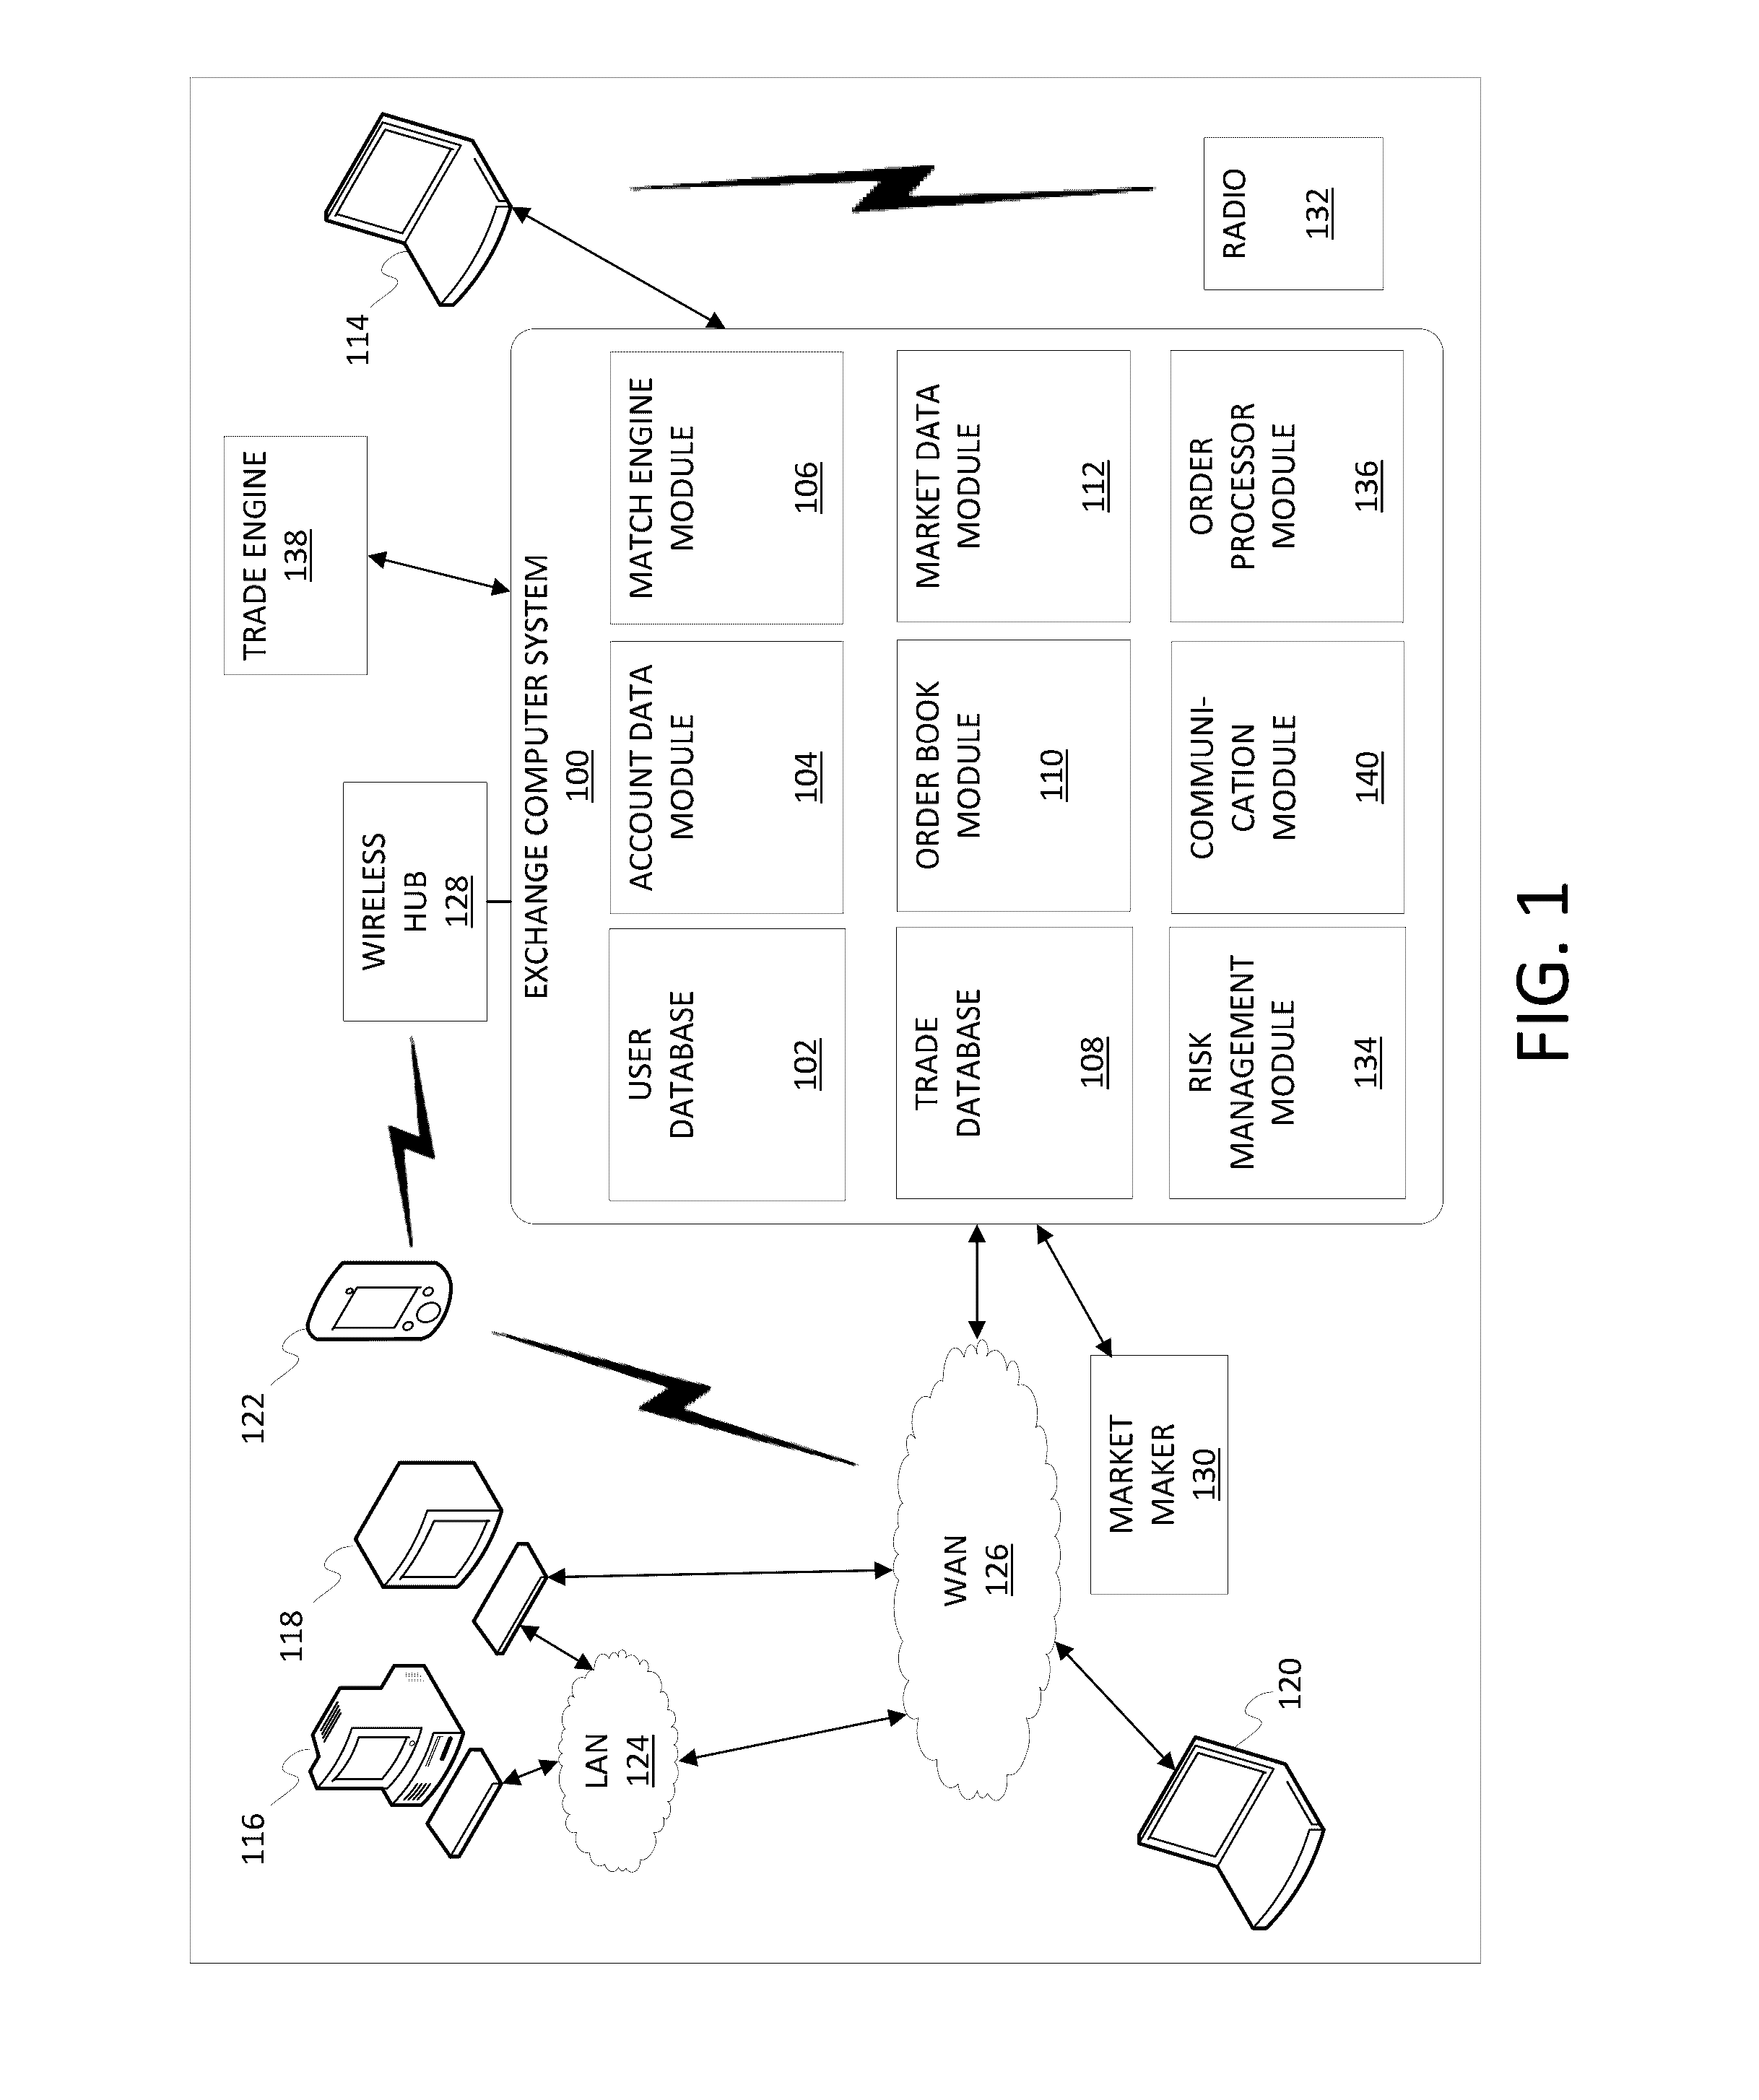 Dissemination of order status information present on an electronic exchange